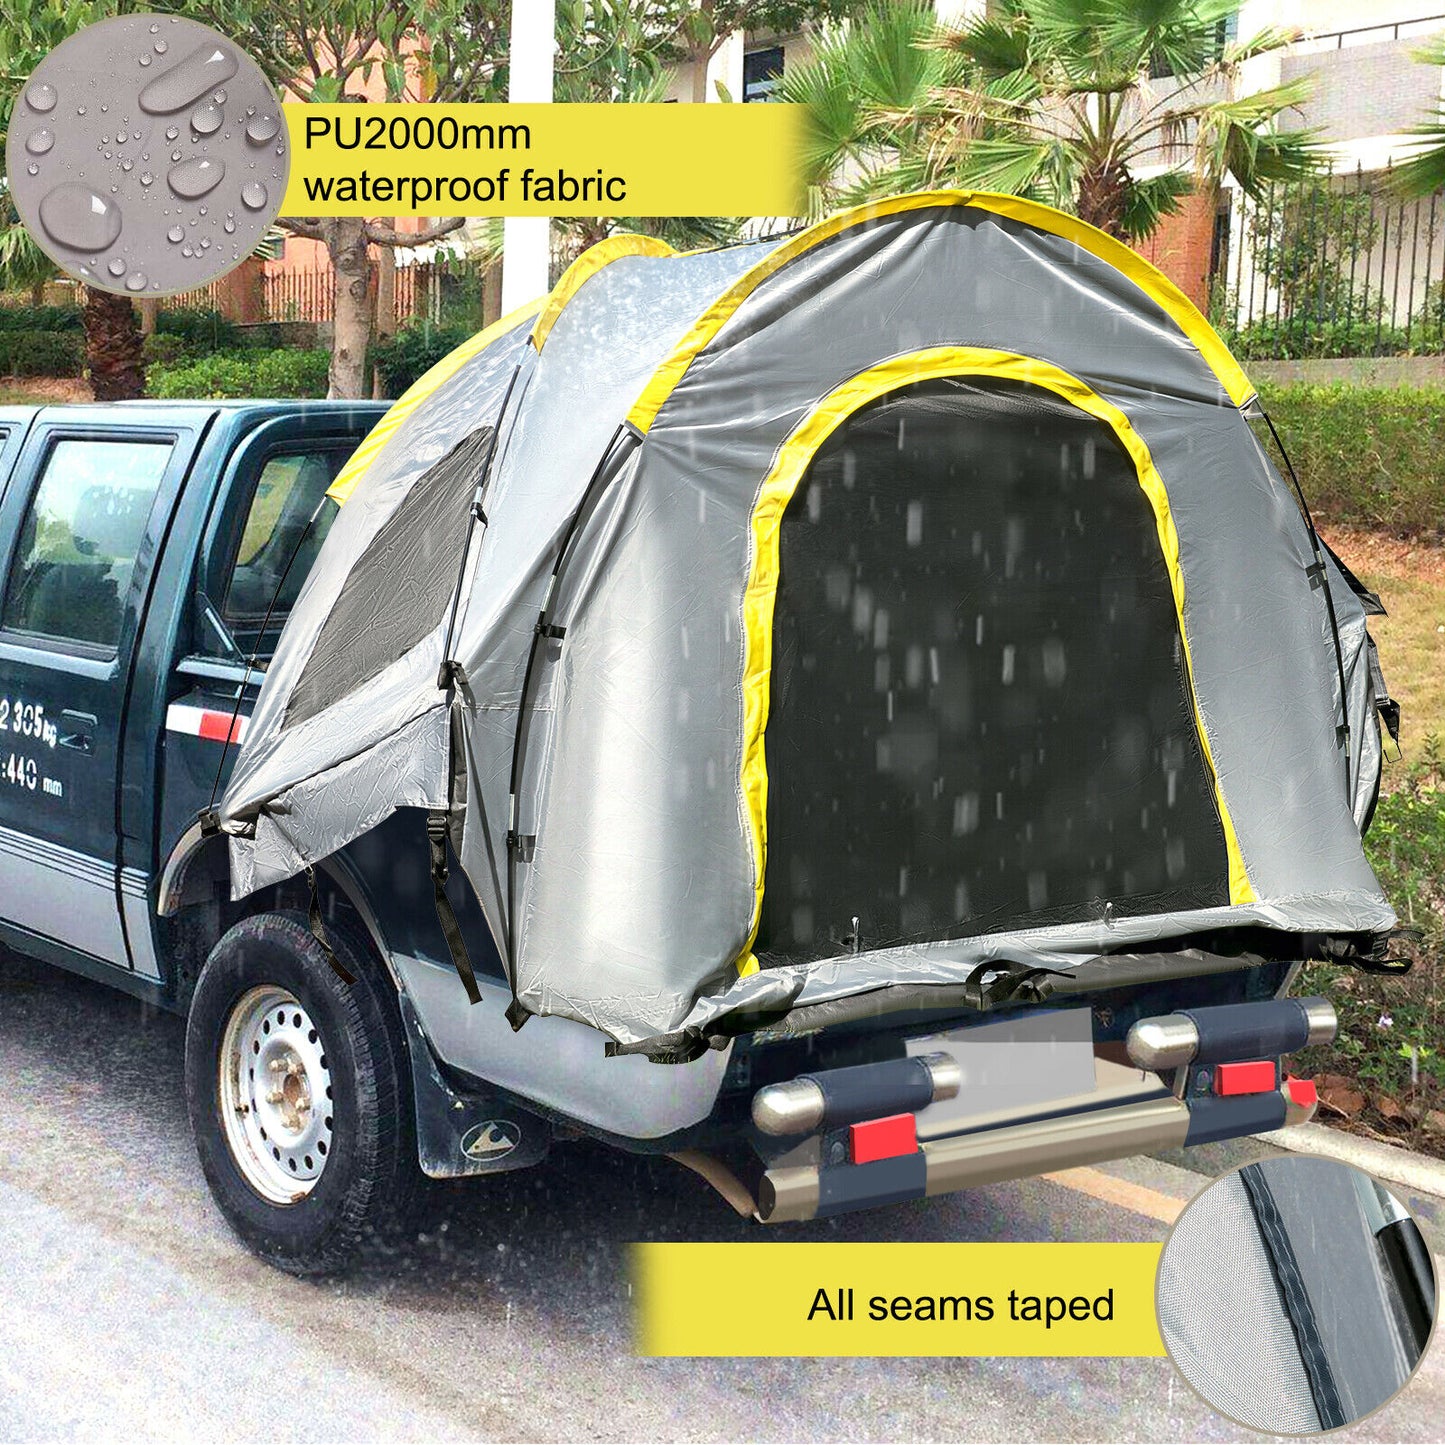 VEVOR 5-8 FT Waterproof Truck Tent Car Accessories Bed for Full / Mid Size Truck 2-Person Sleeping Capacity for Camping Hiking